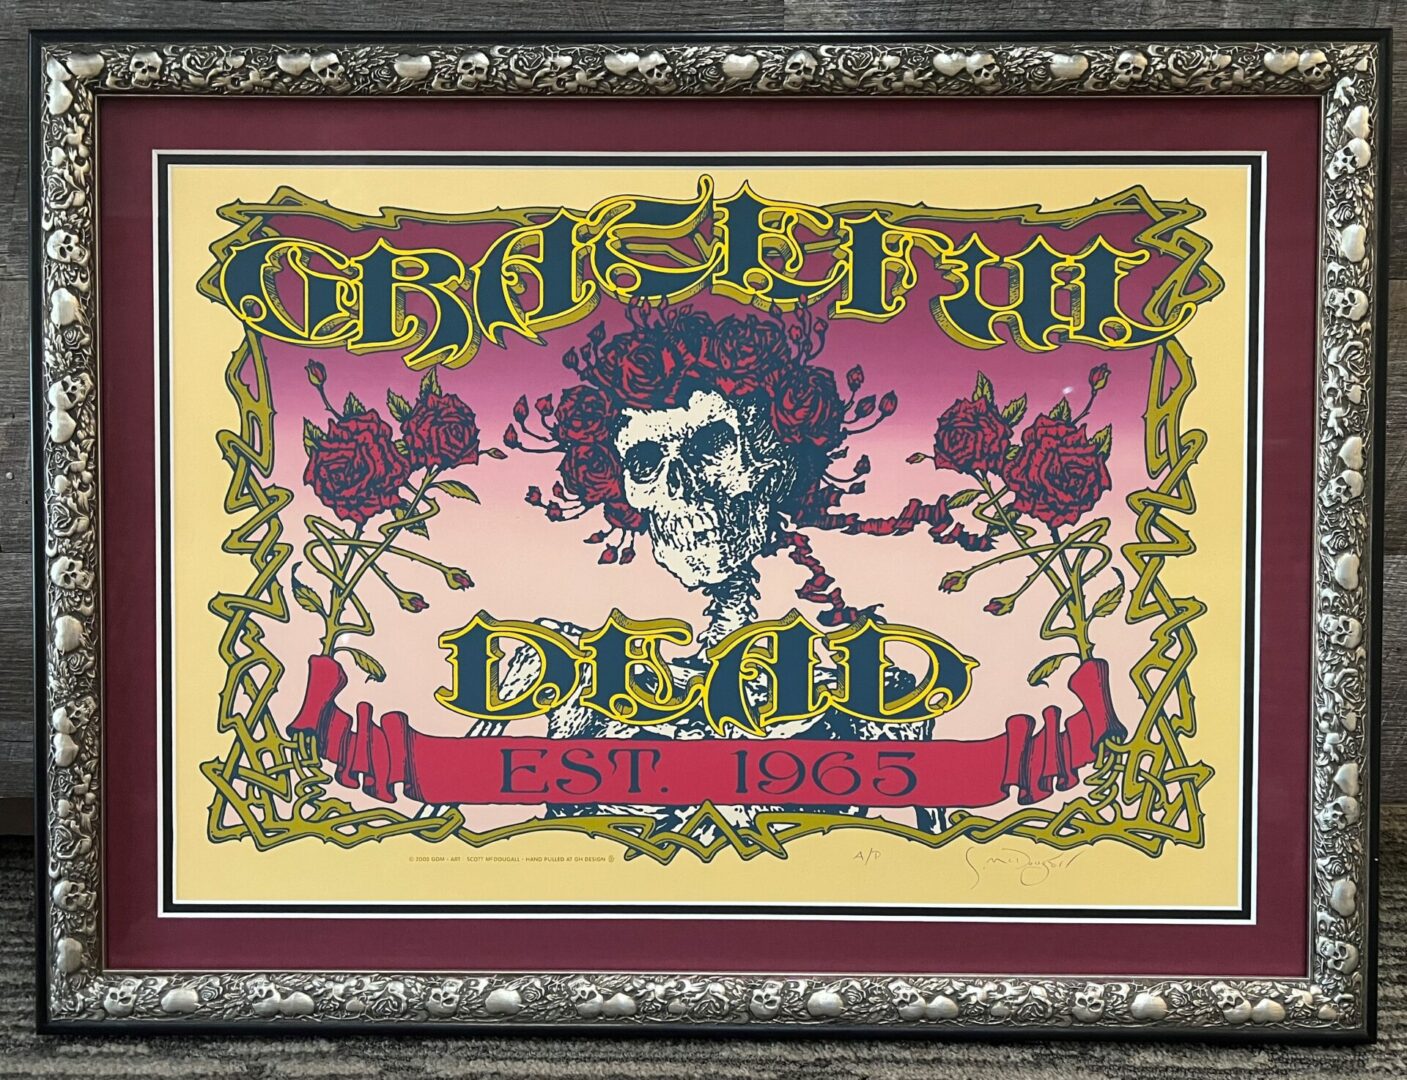 A framed picture of the grateful dead.